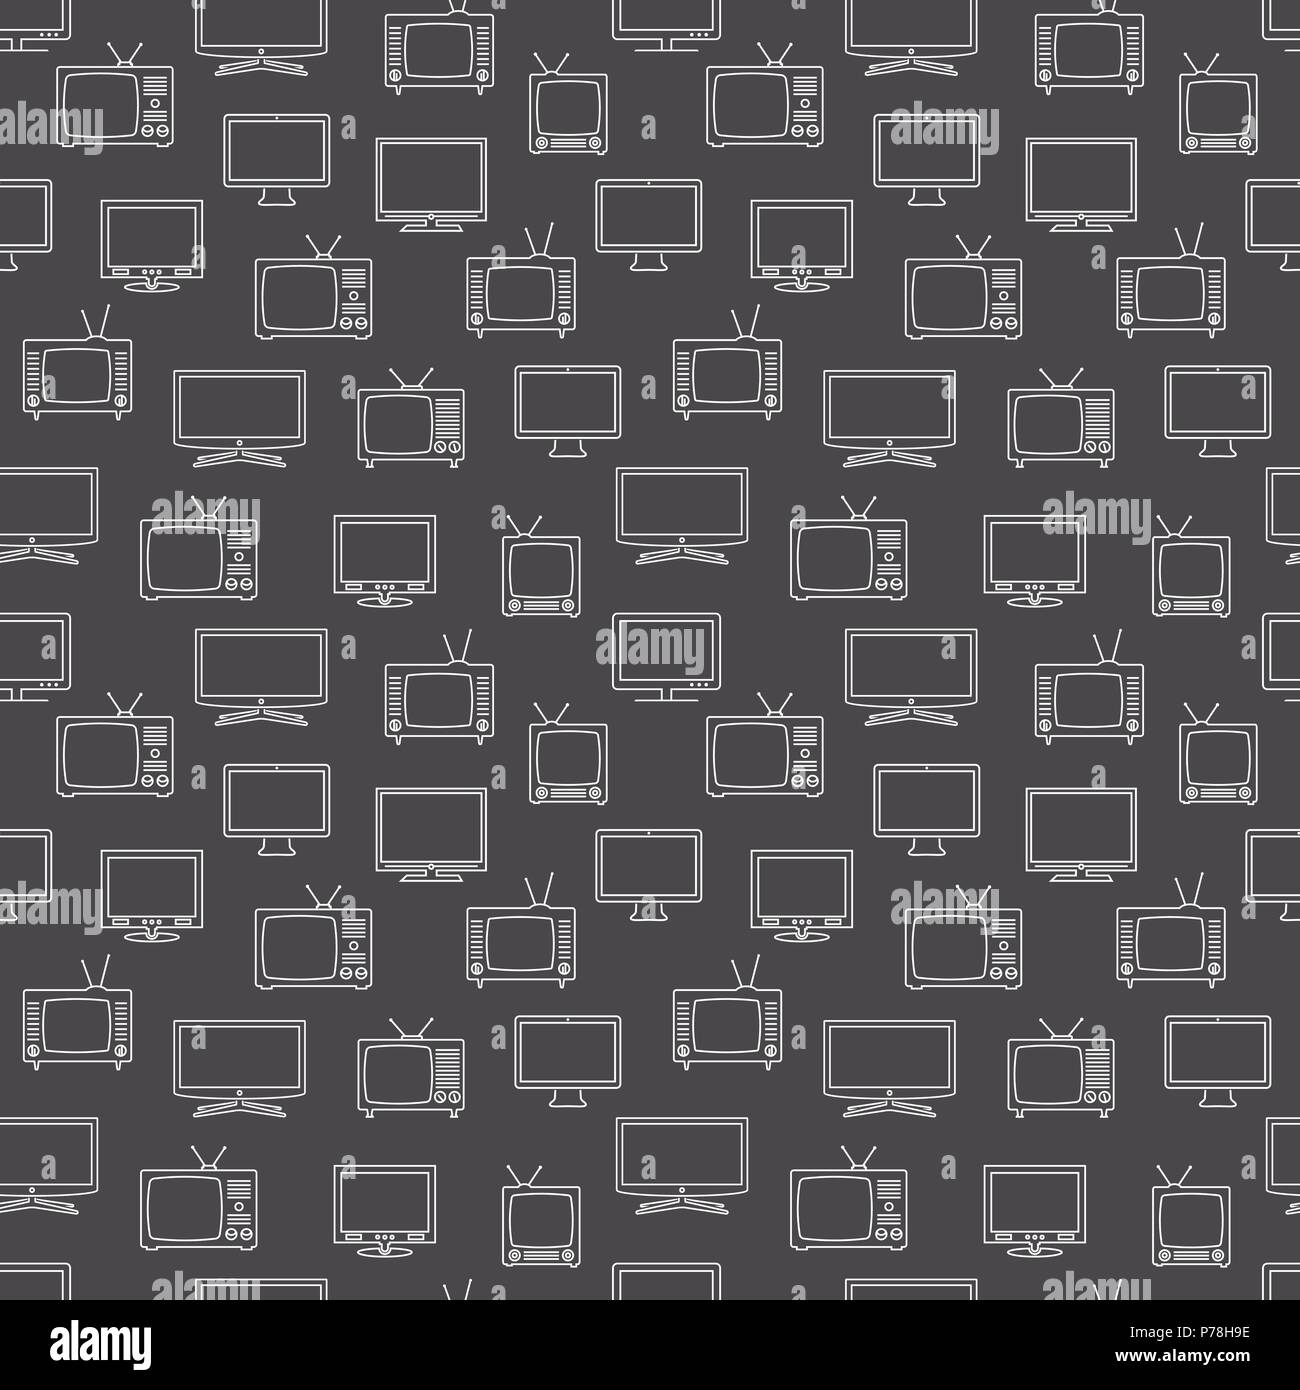 Tv icon in line style seamless pattern background. Television sign symbol pattern. Stock Vector